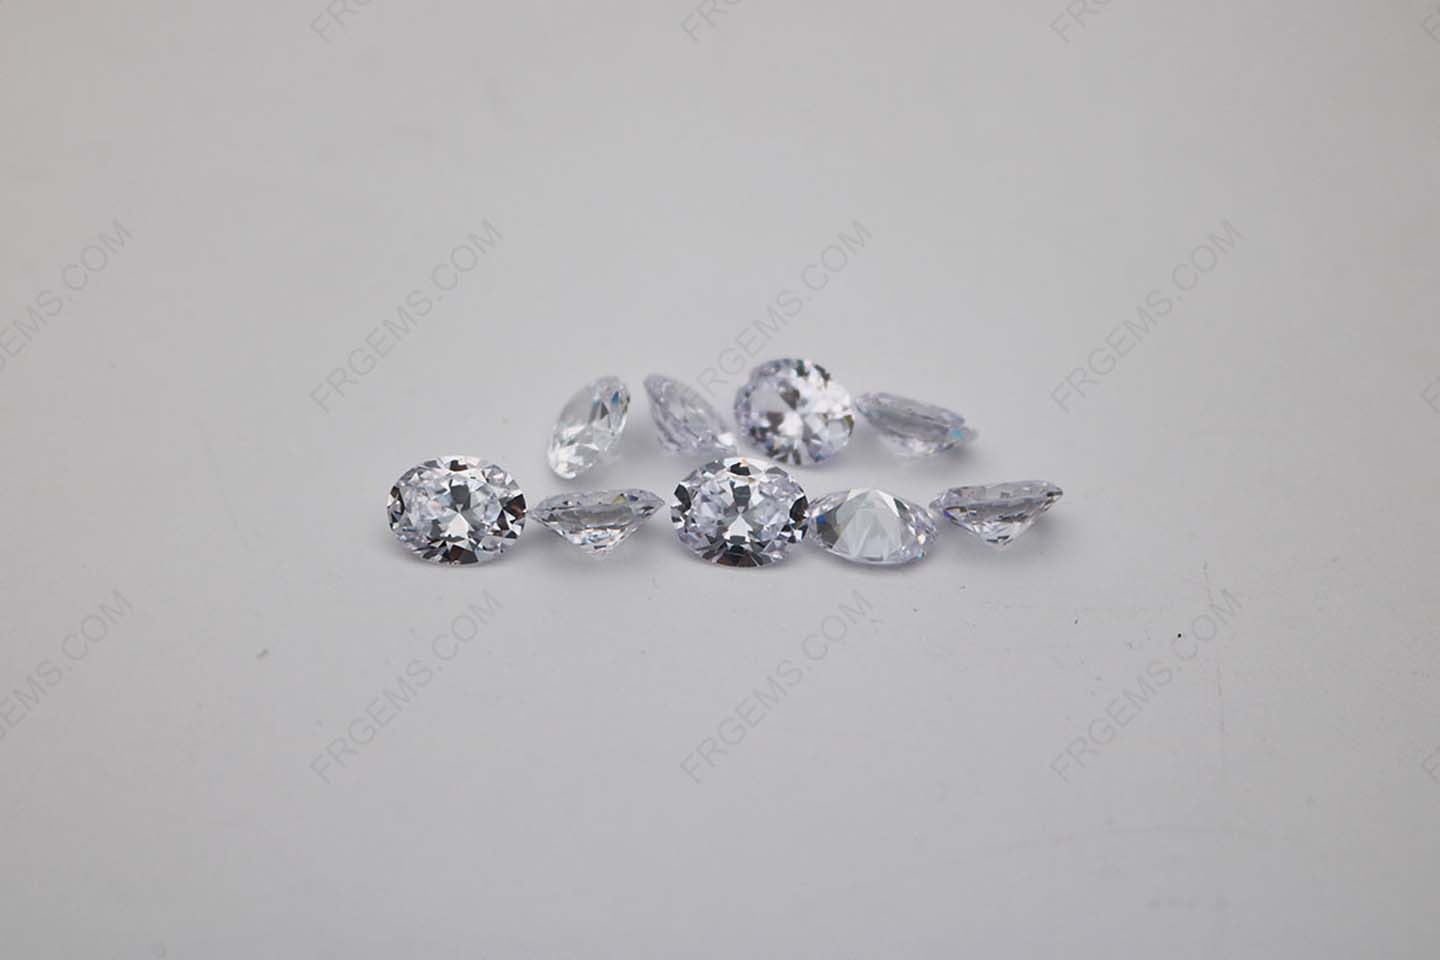 Cubic Zirconia White Color Oval Shape Faceted Cut 10x8mm stones CZ01 IMG_2287